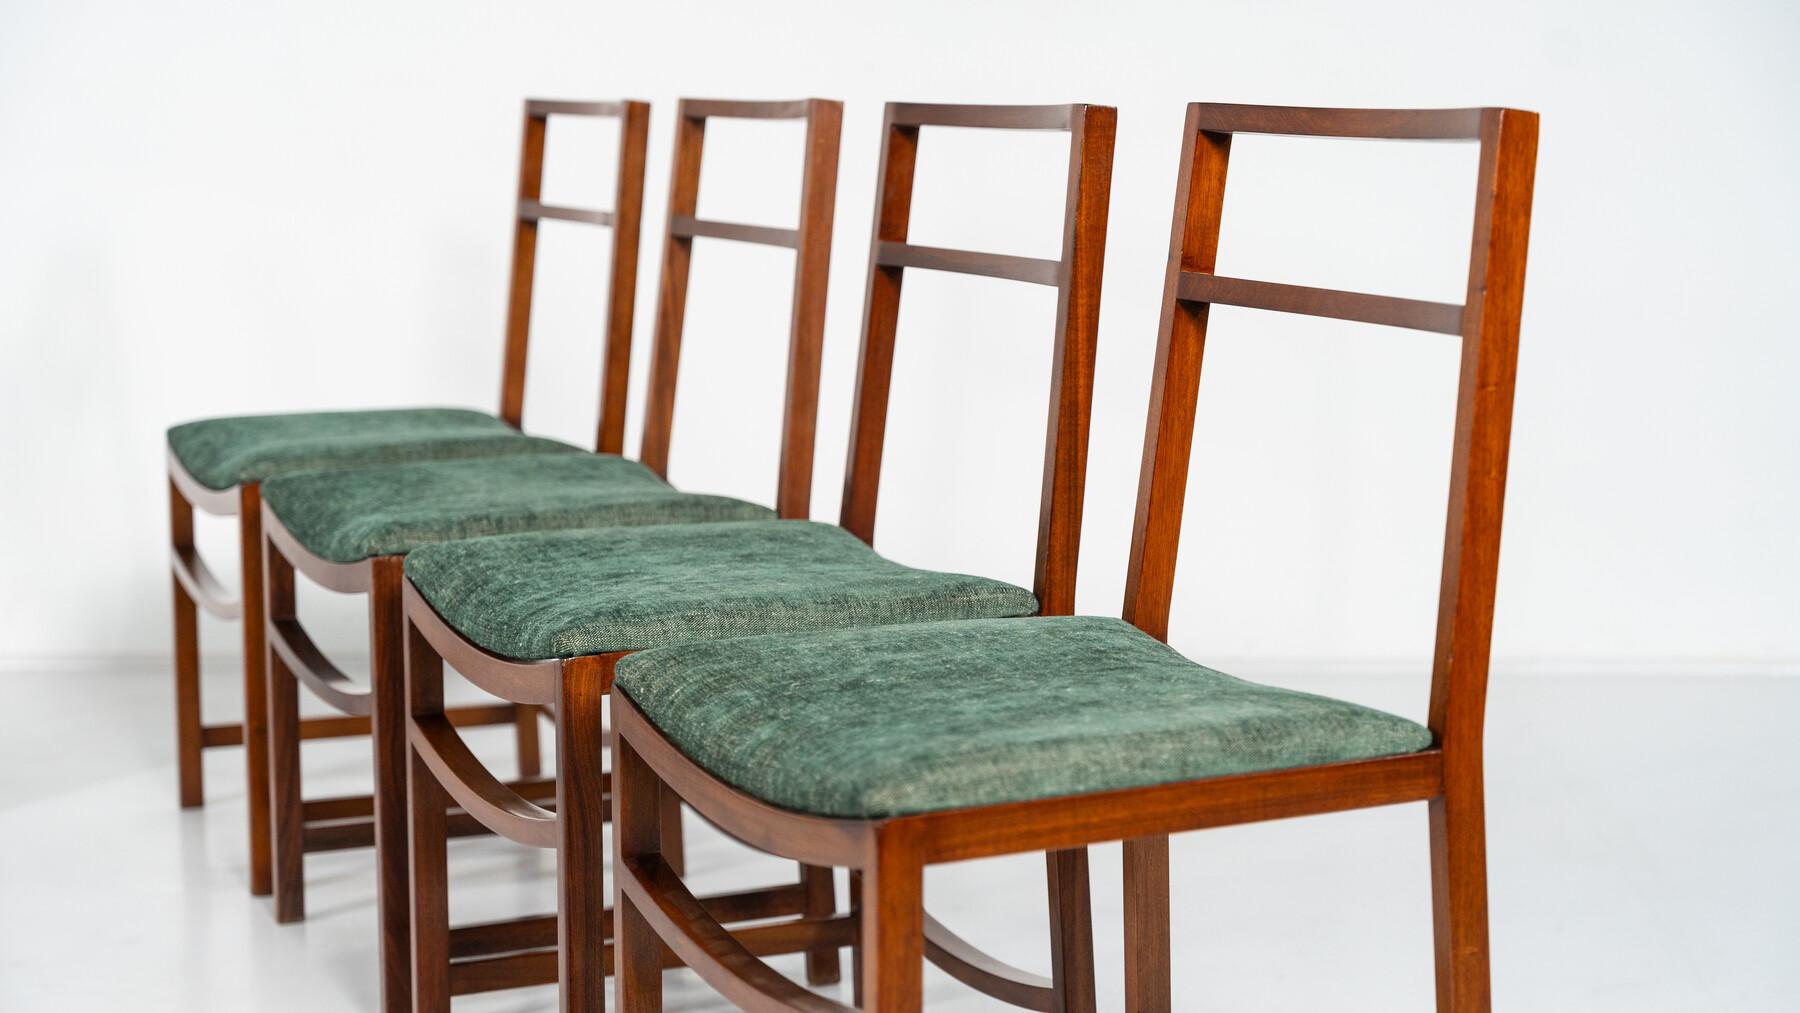 Fabric Set of 8 Mid-Century Modern Dining Chairs by Renato Venturi for MIM, 1950s For Sale